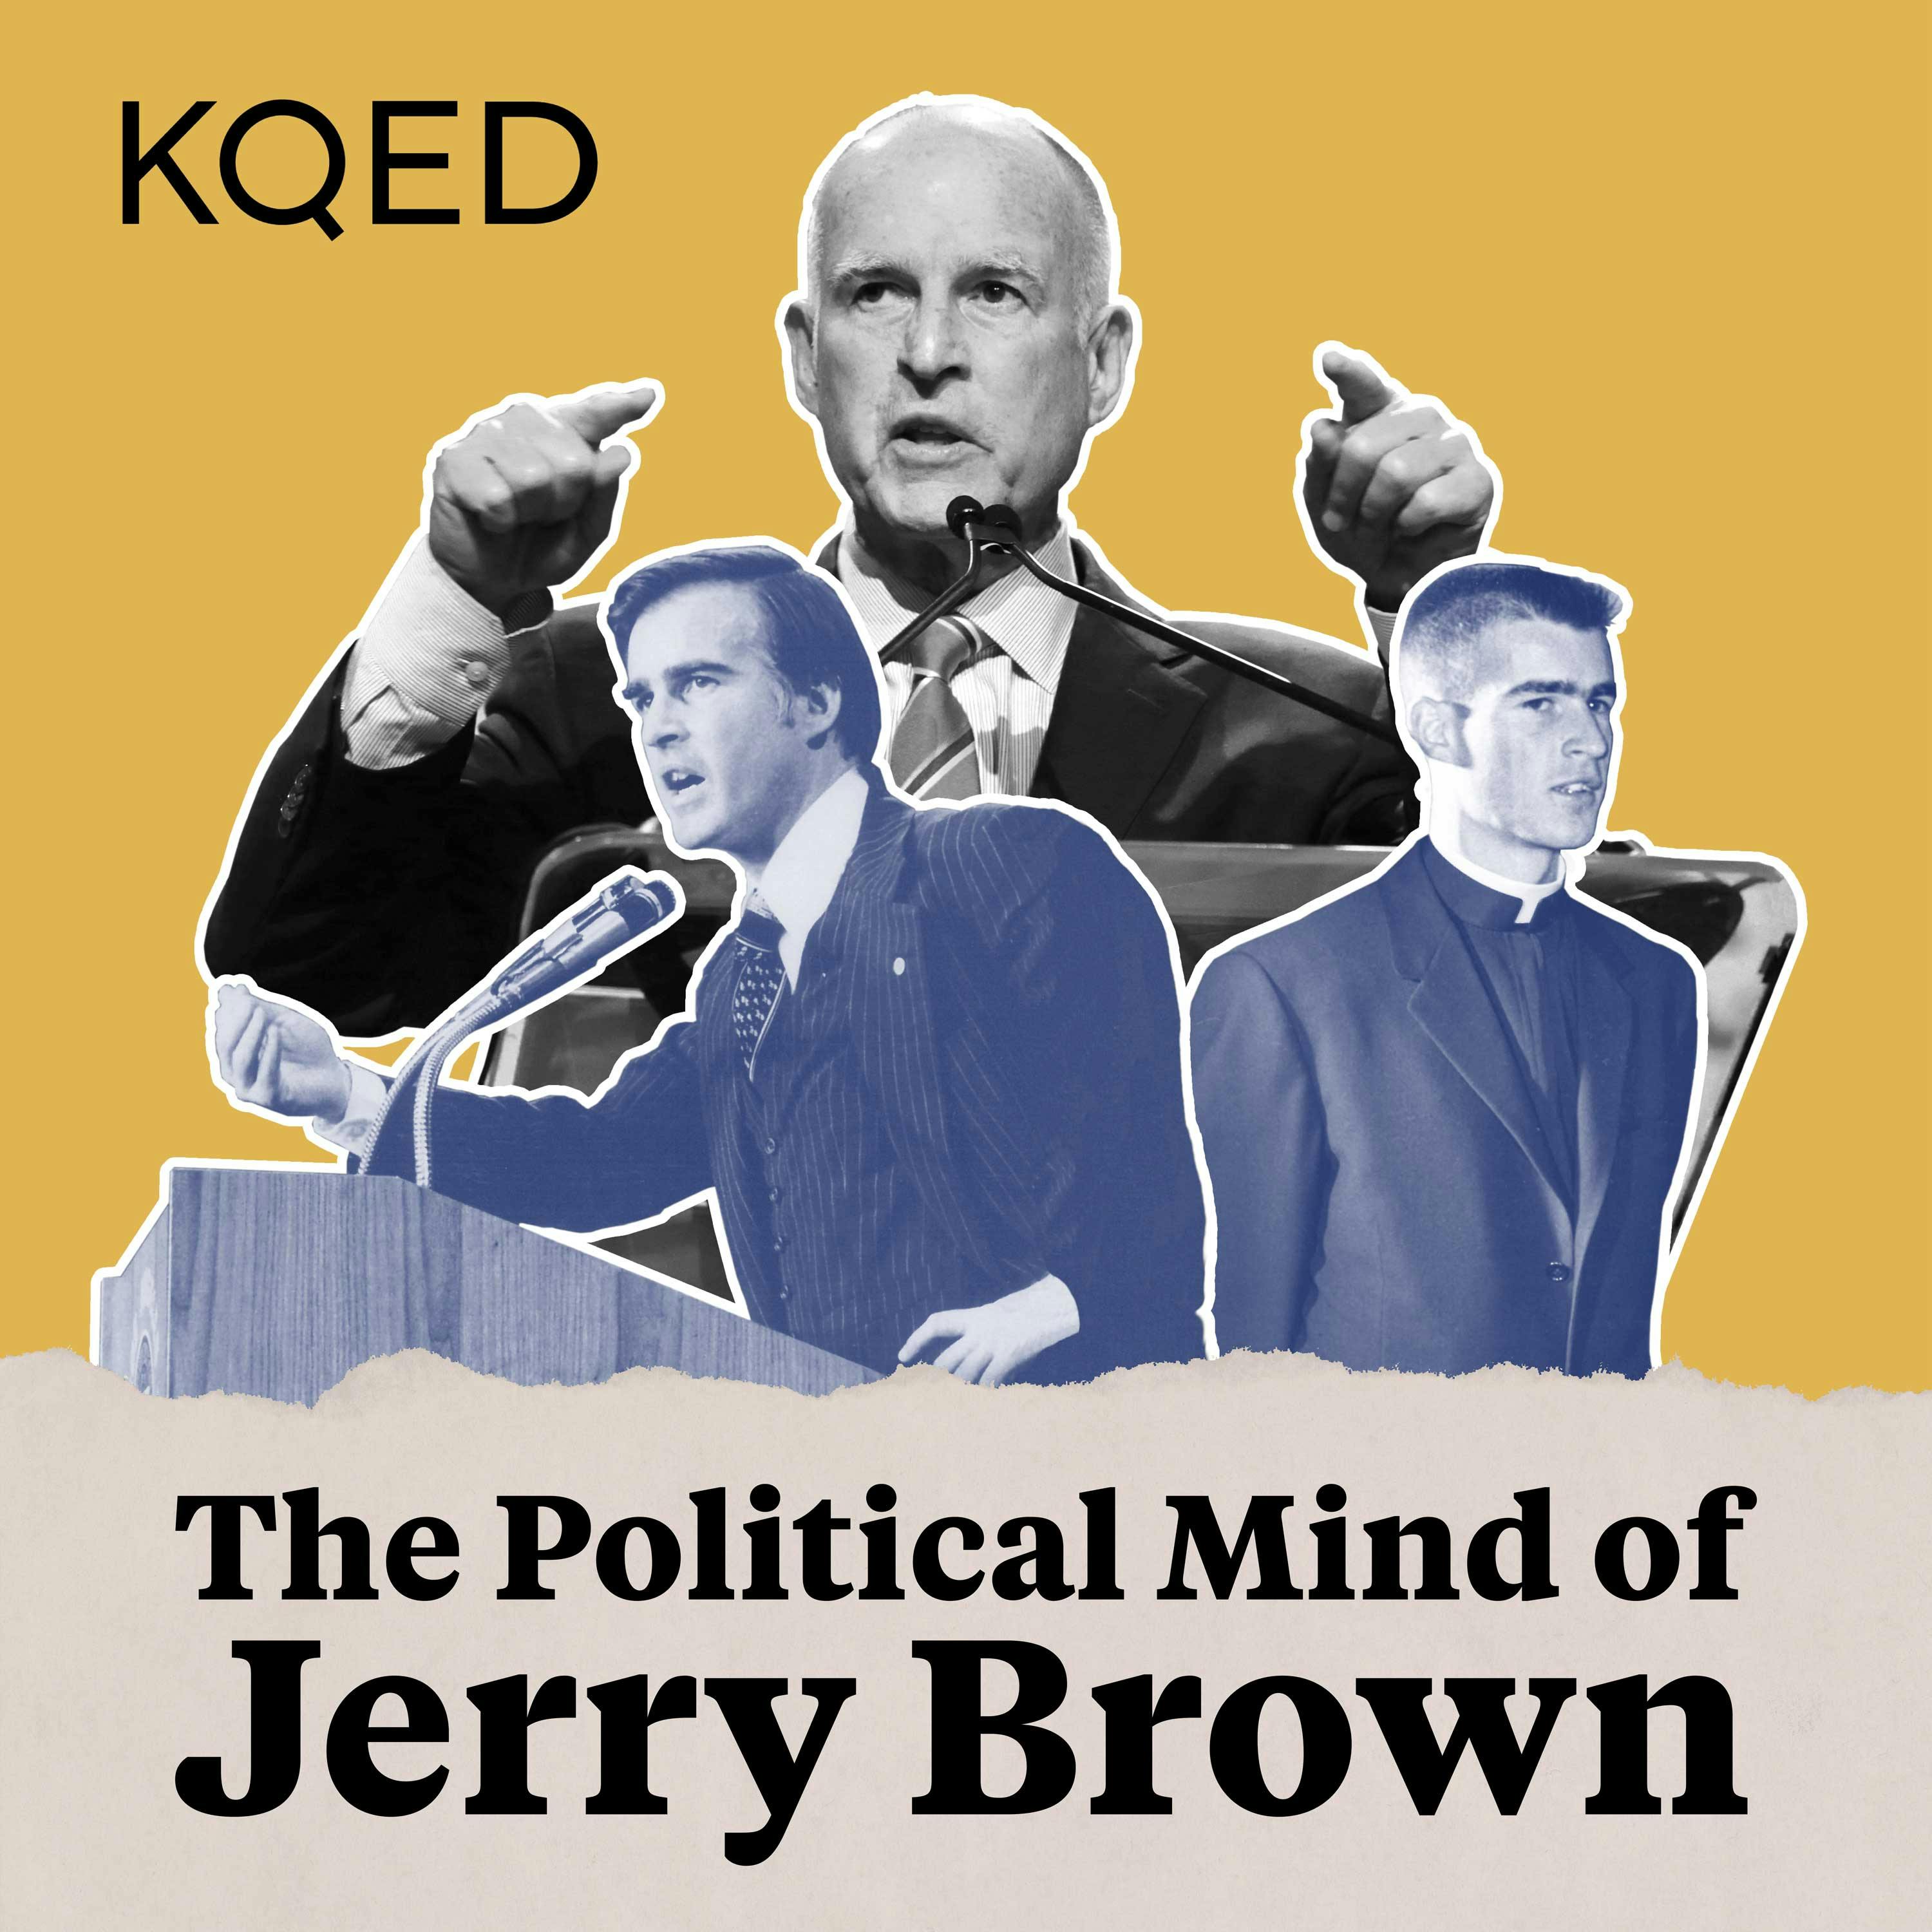 Introducing The Political Mind of Jerry Brown